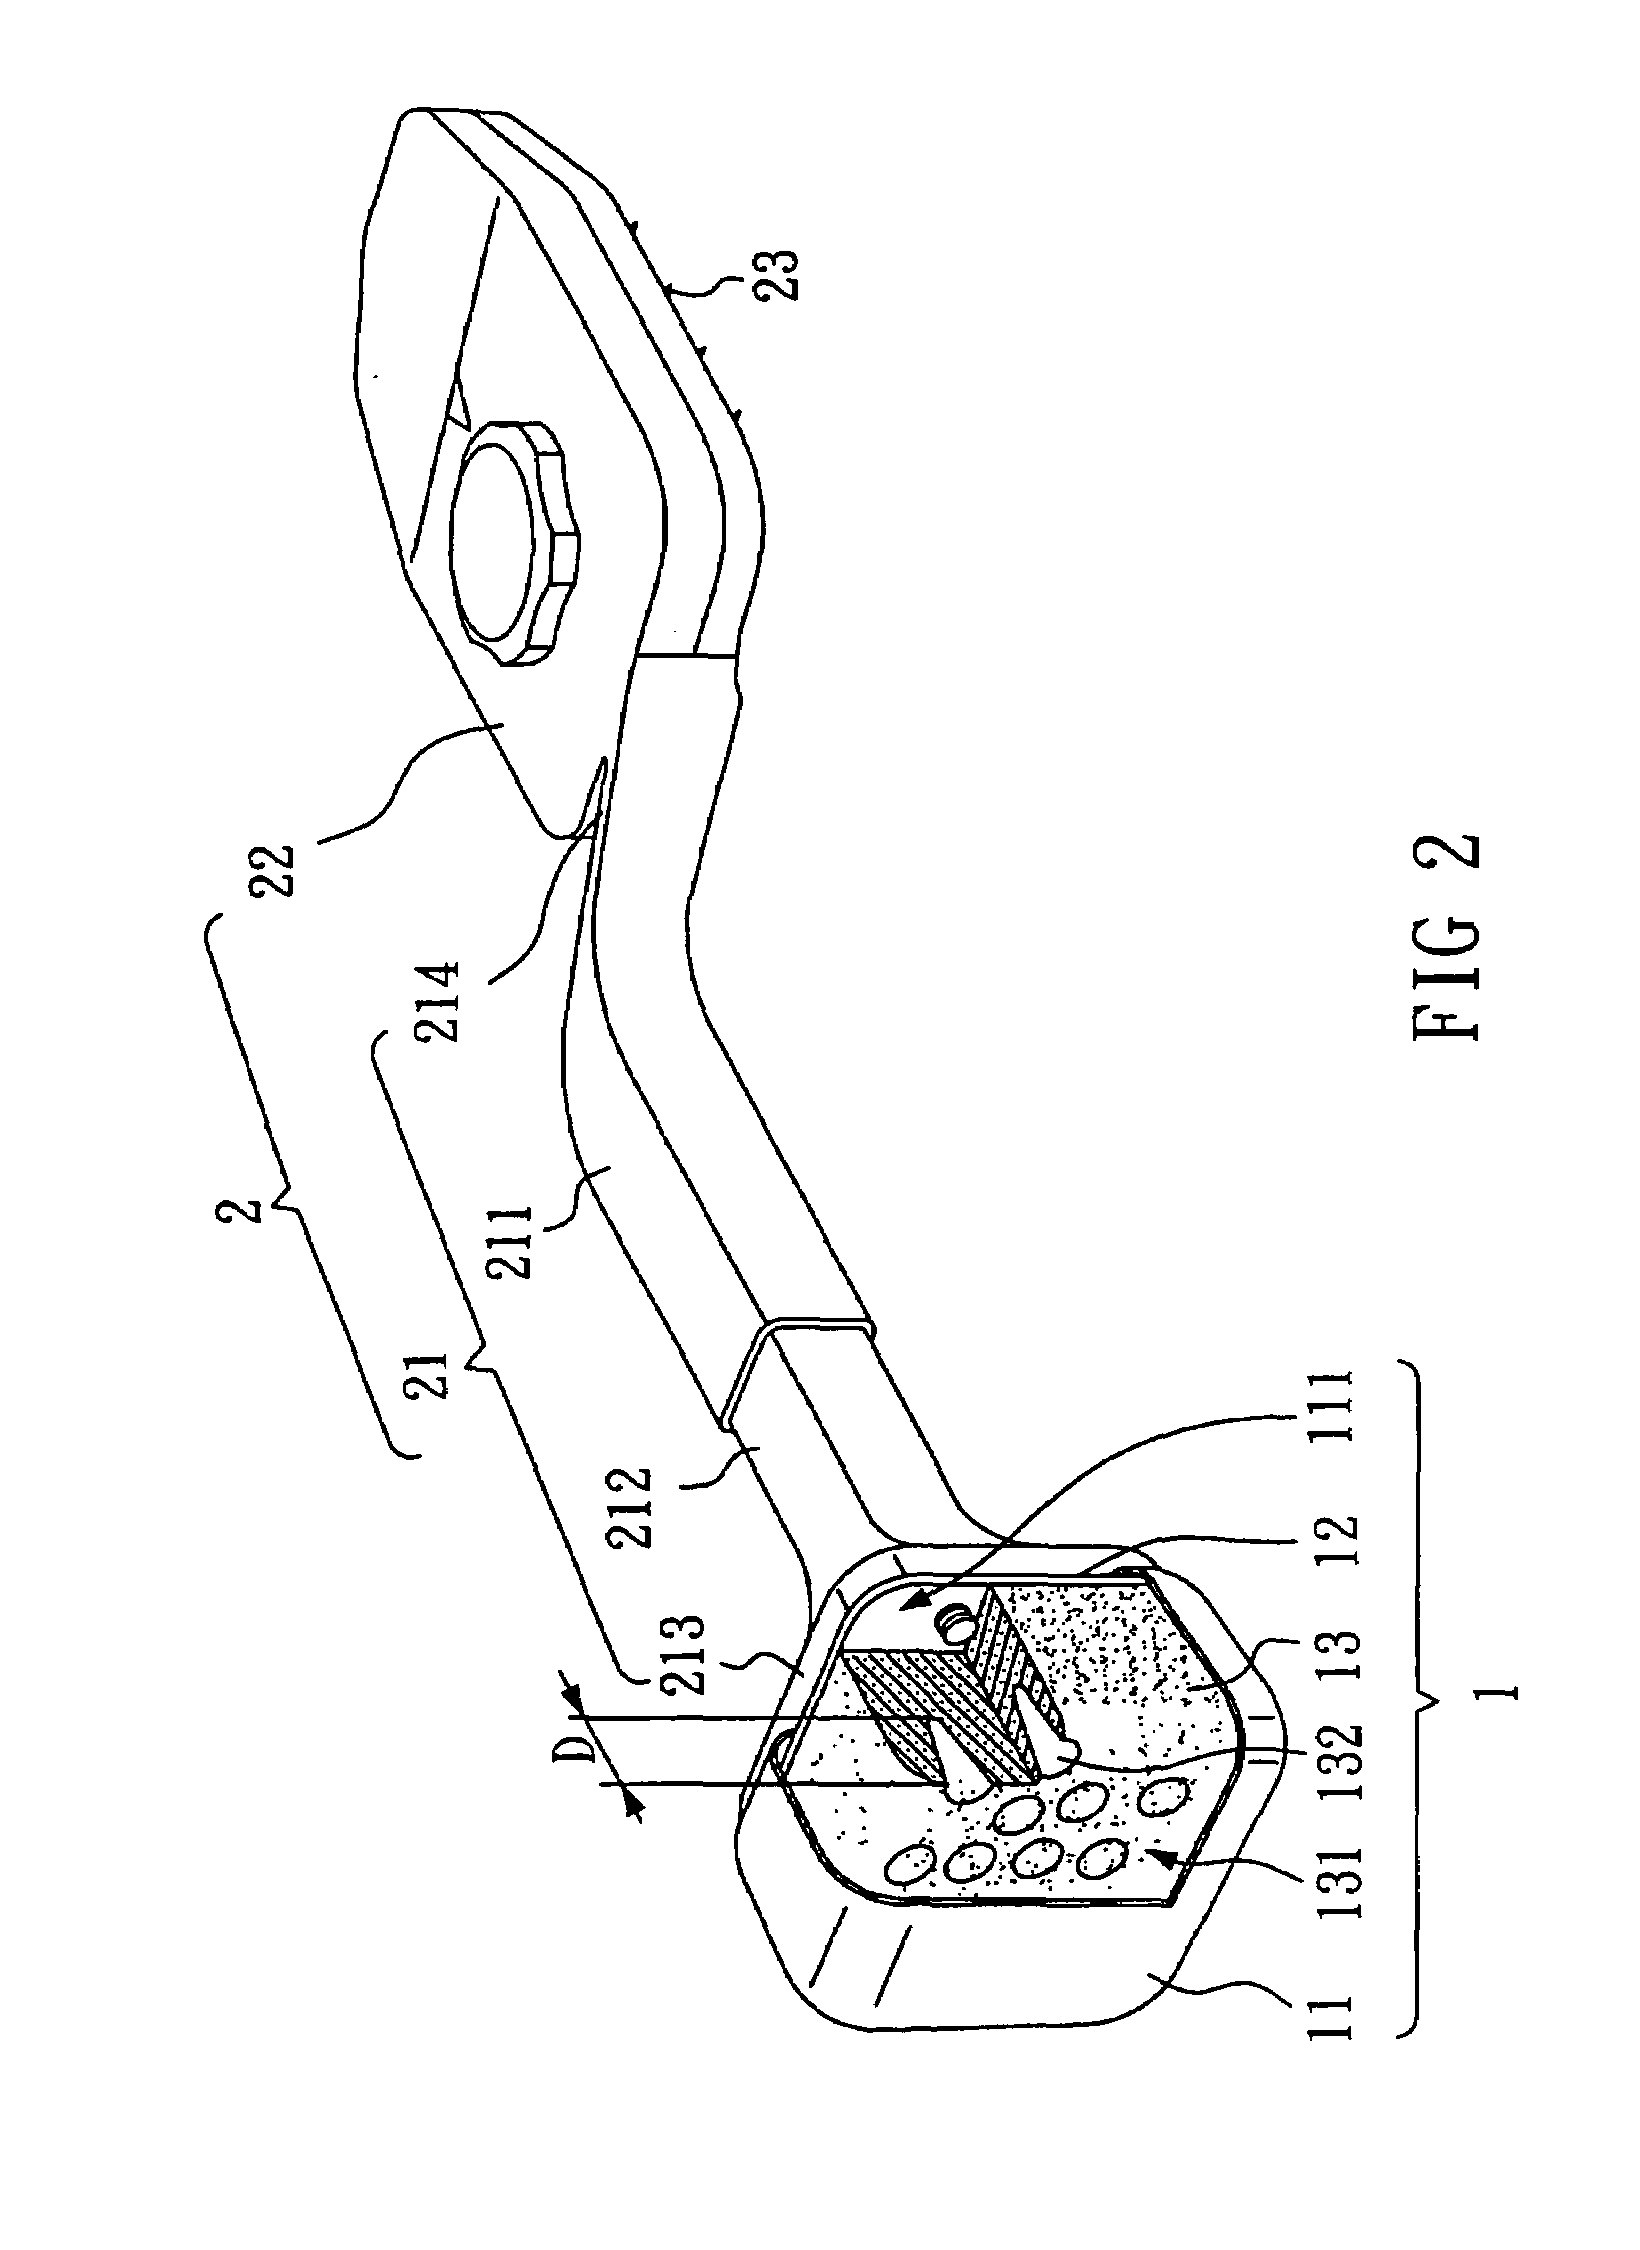 Cushion pad structure for a carpet installation tool